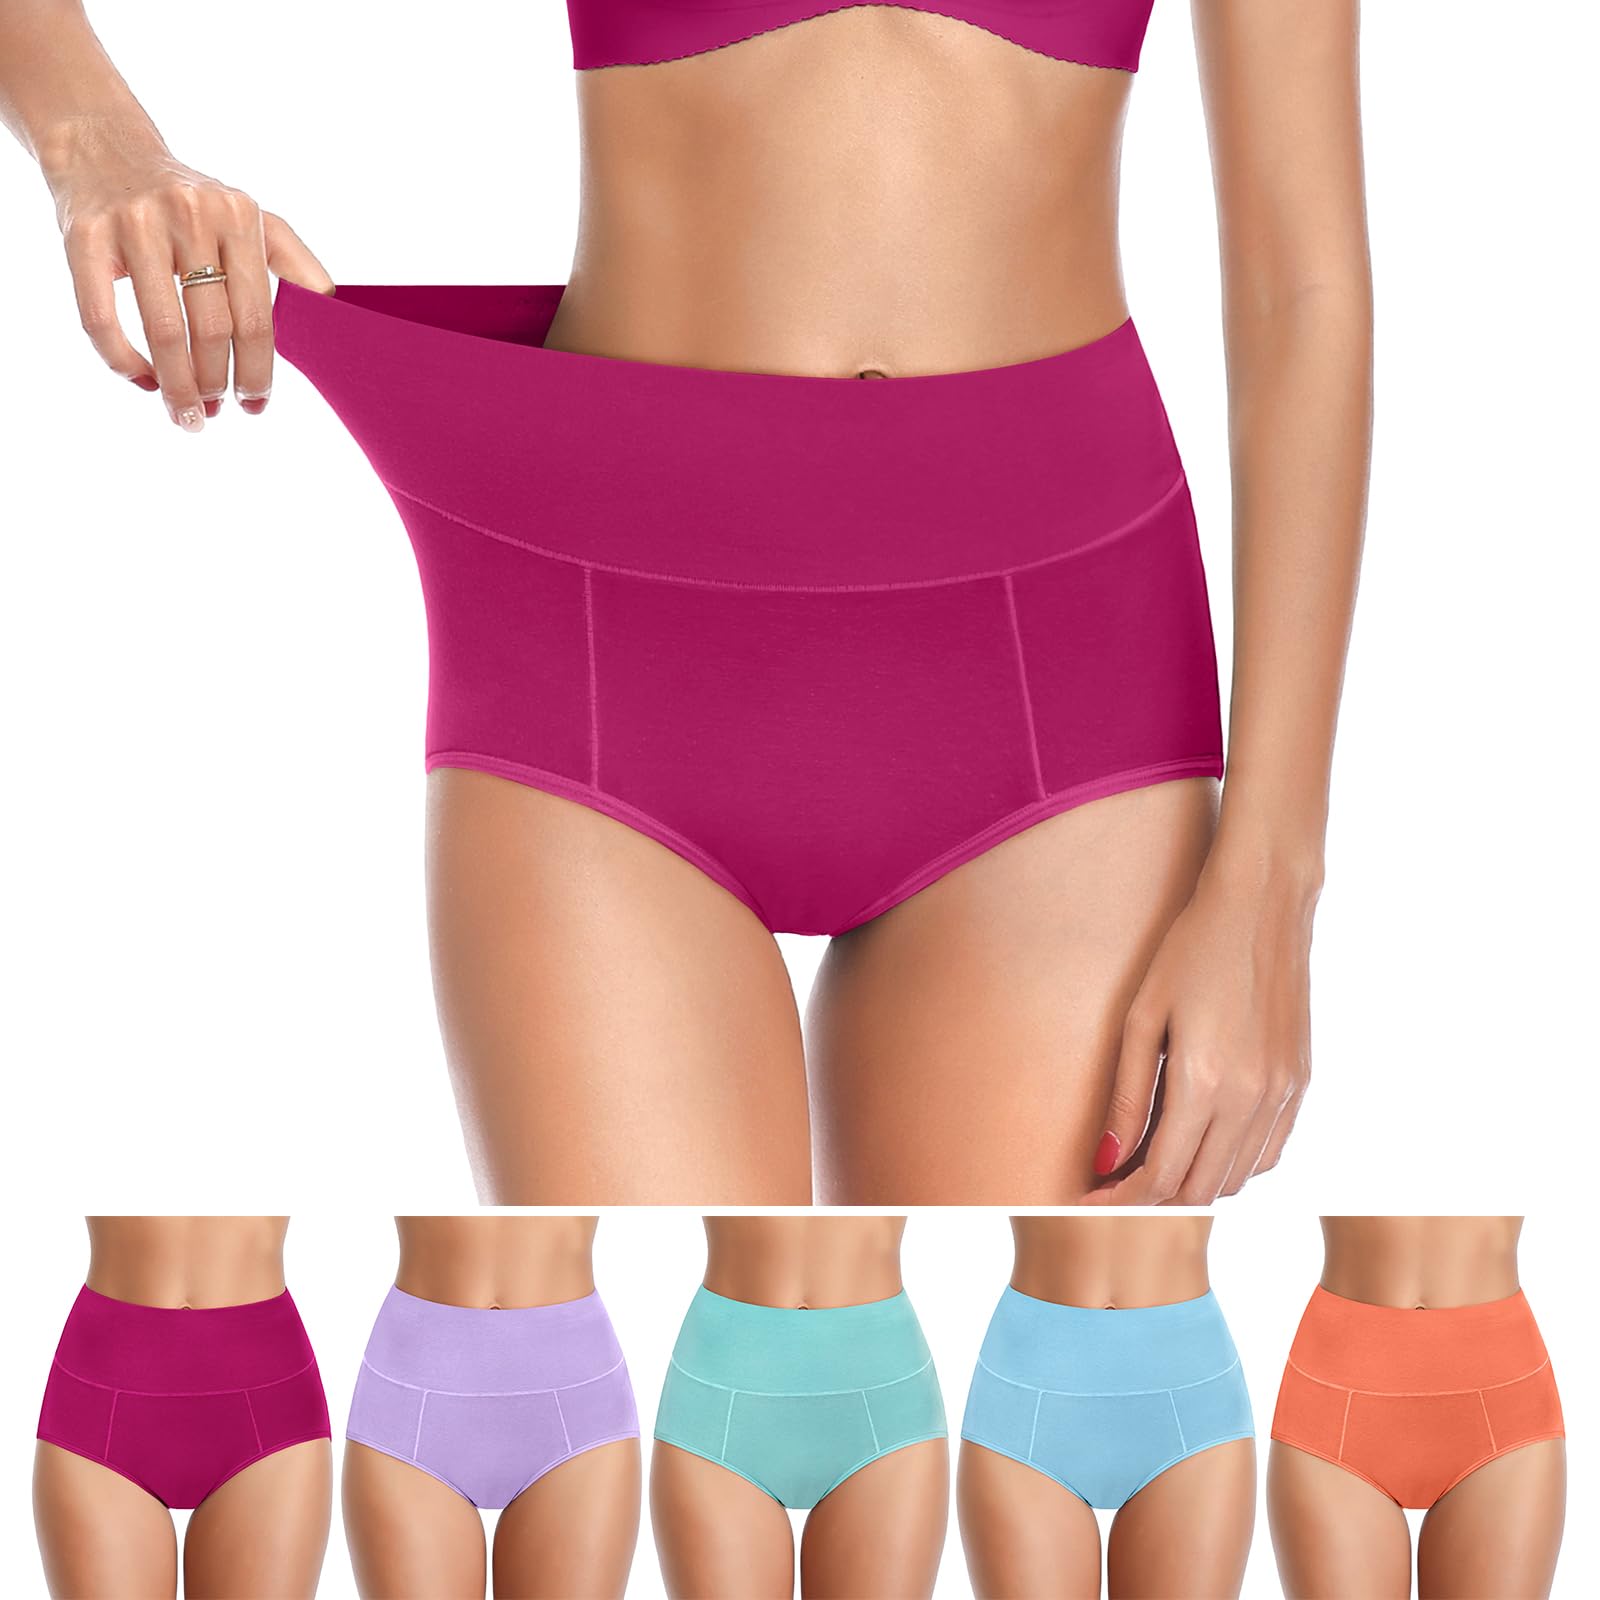 Buy ASIMOON Womens Underwear, Cotton Underwear No Muffin Top Full Briefs  Soft Stretch Breathable Ladies Panties for Women